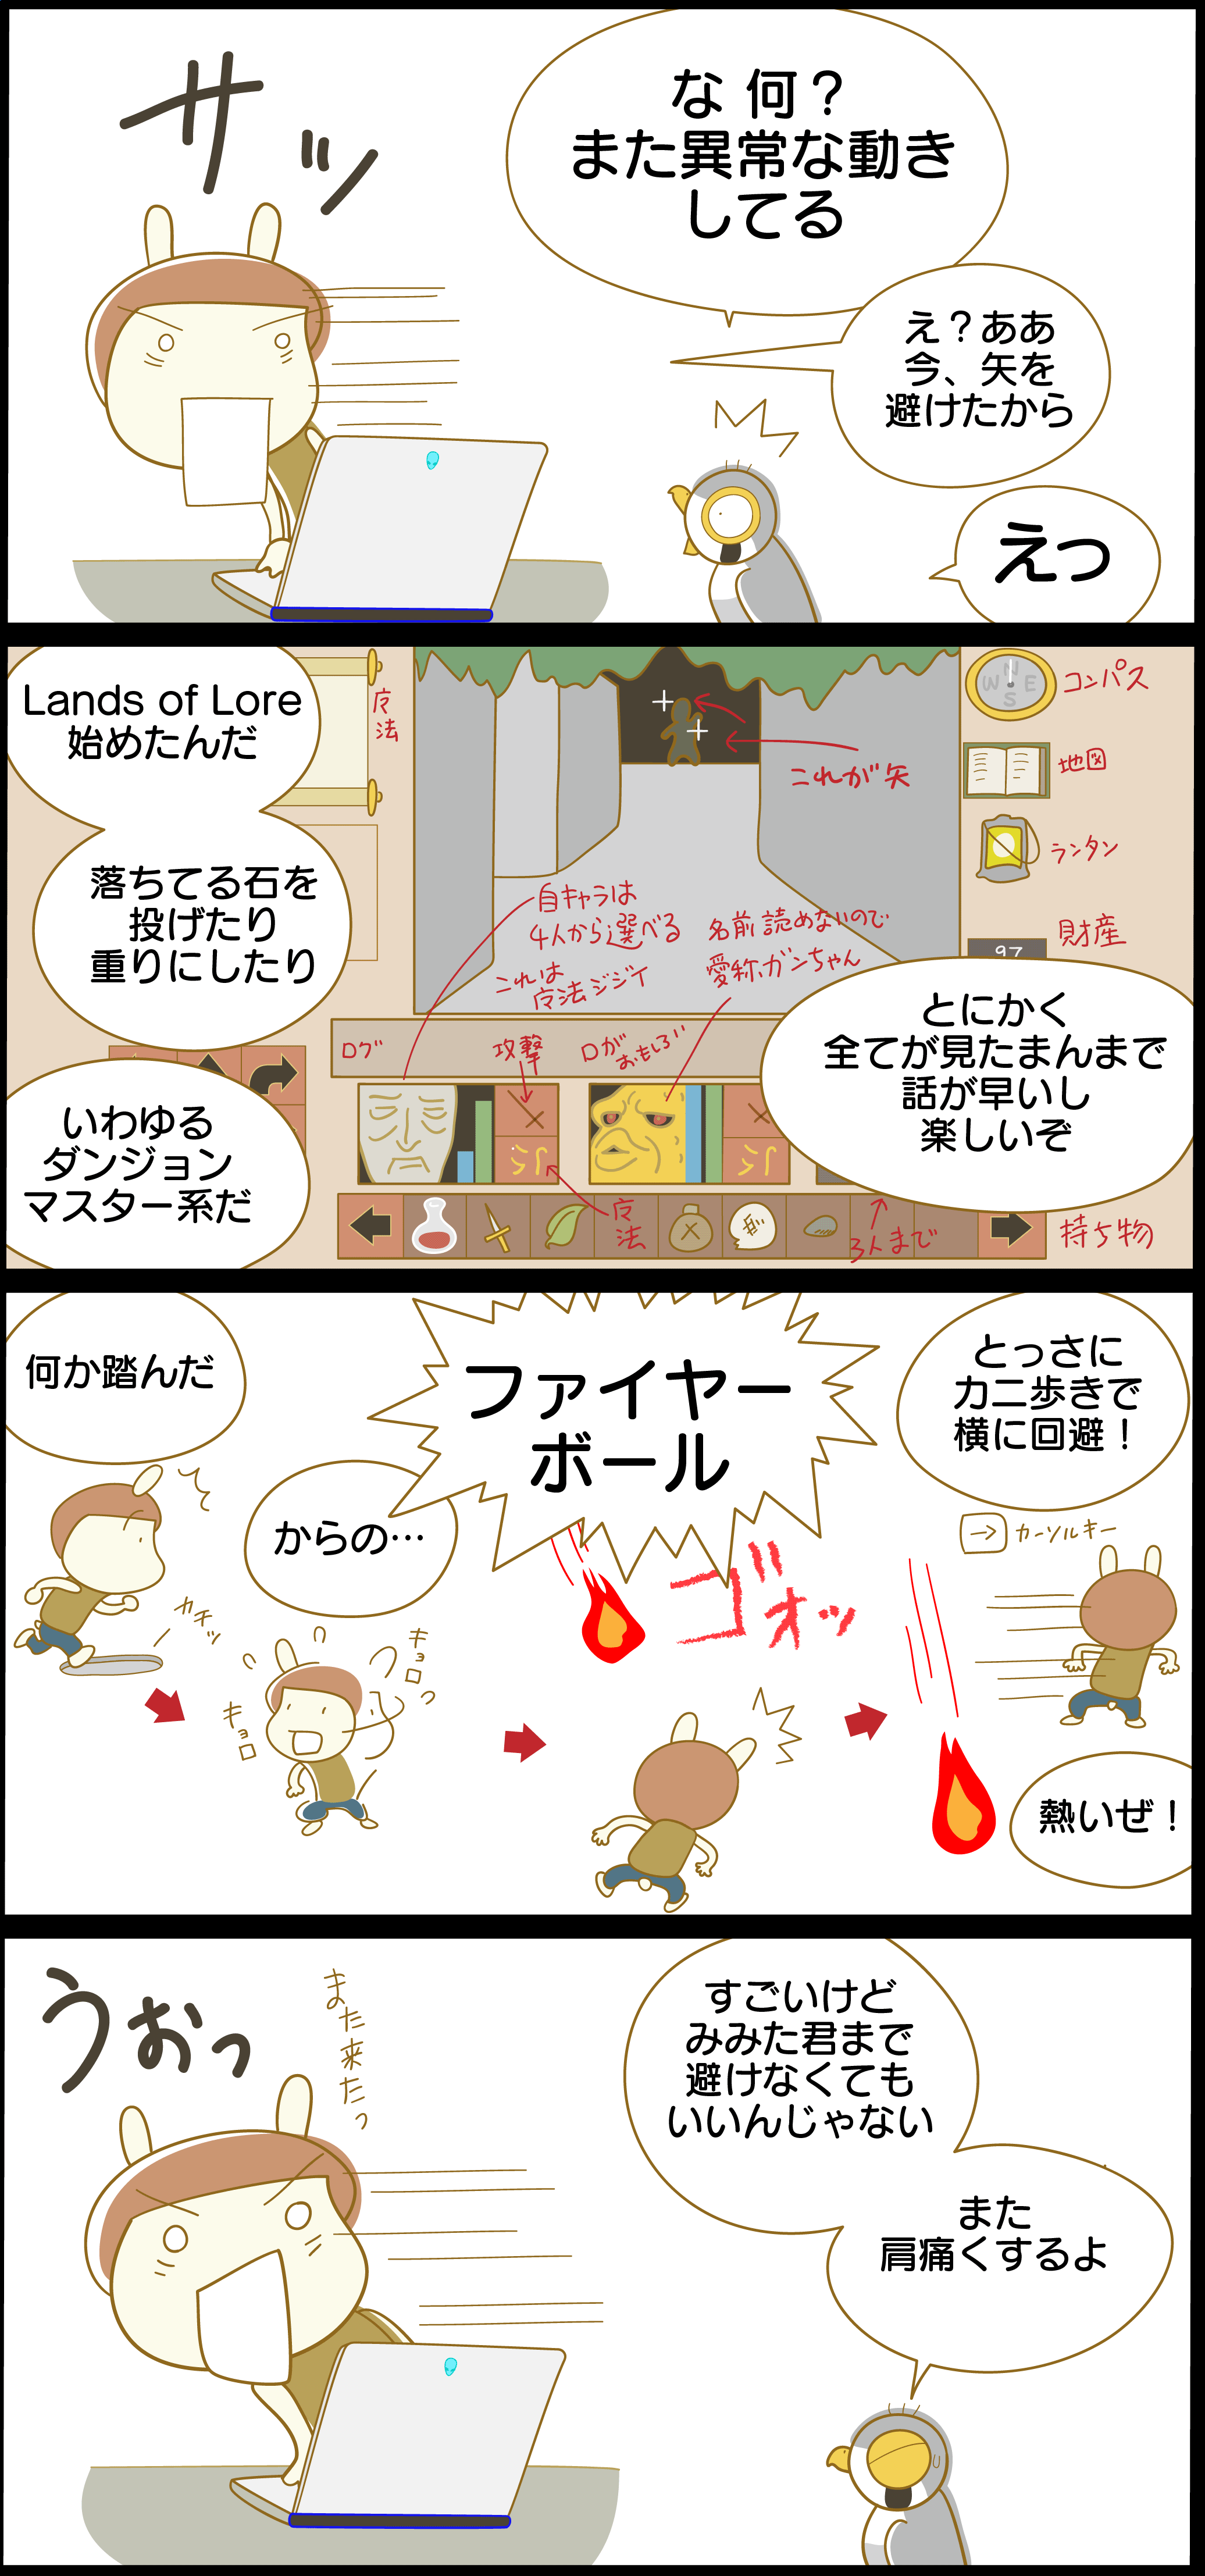 Lands of Lore [漫画日記]